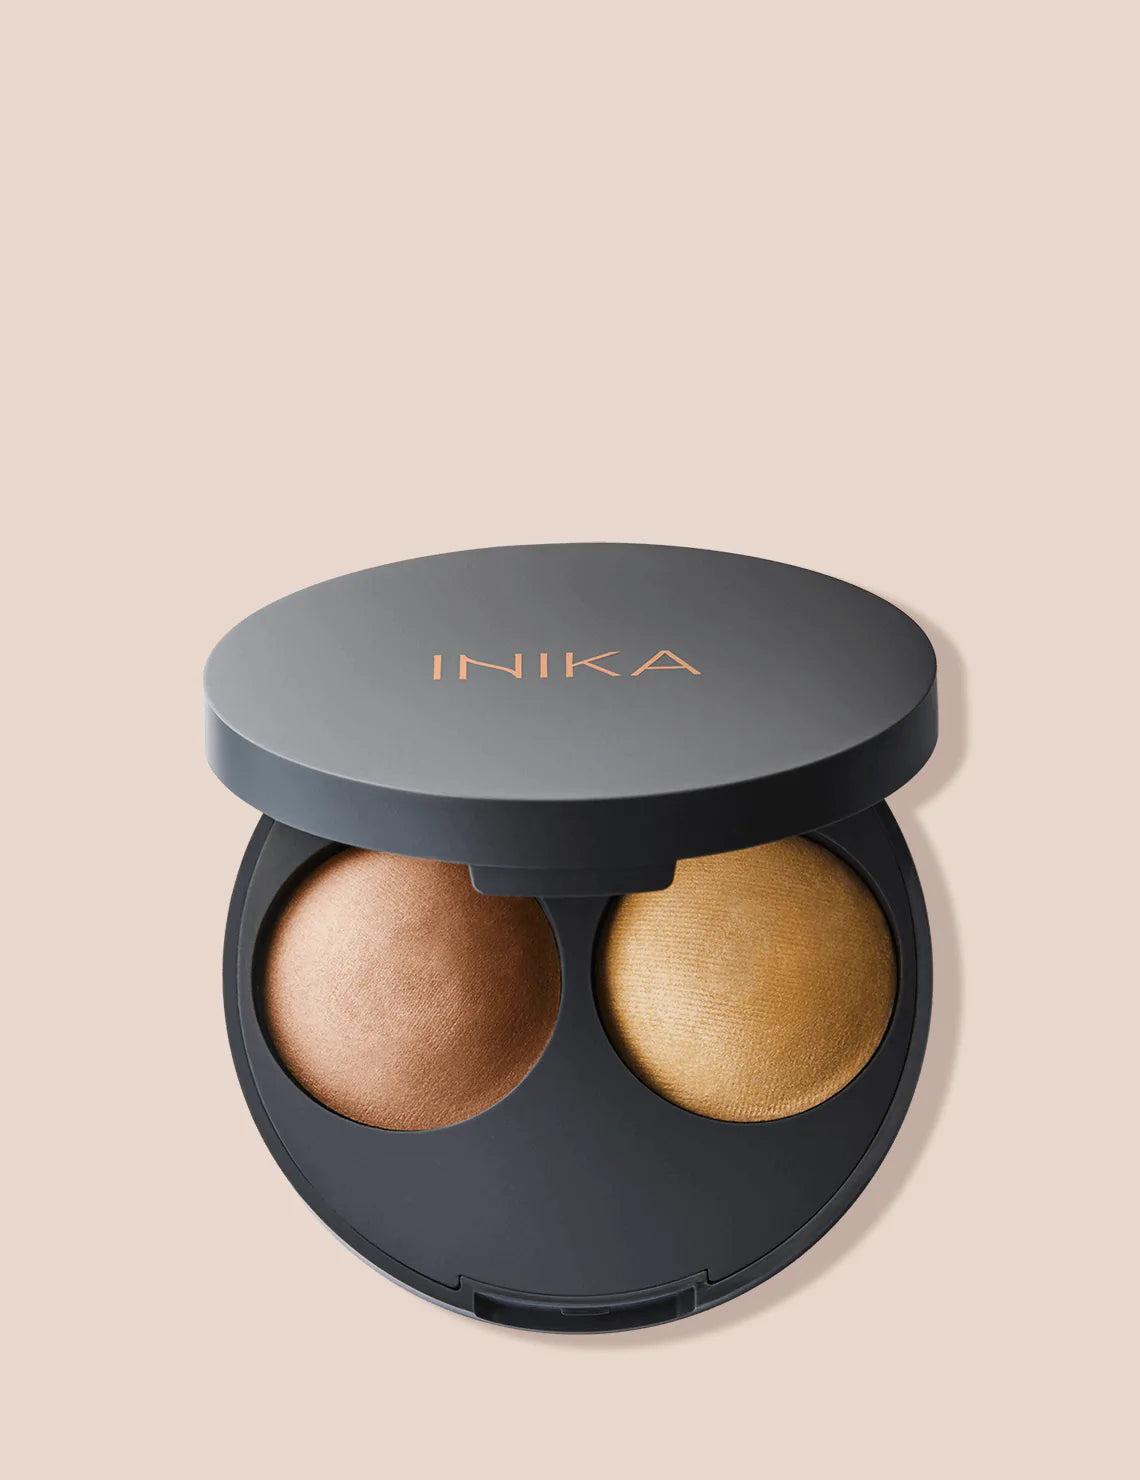 This compact duo contains the highlighter and contour to create the sculpted effect with the bronzed powder and champagne highlight.